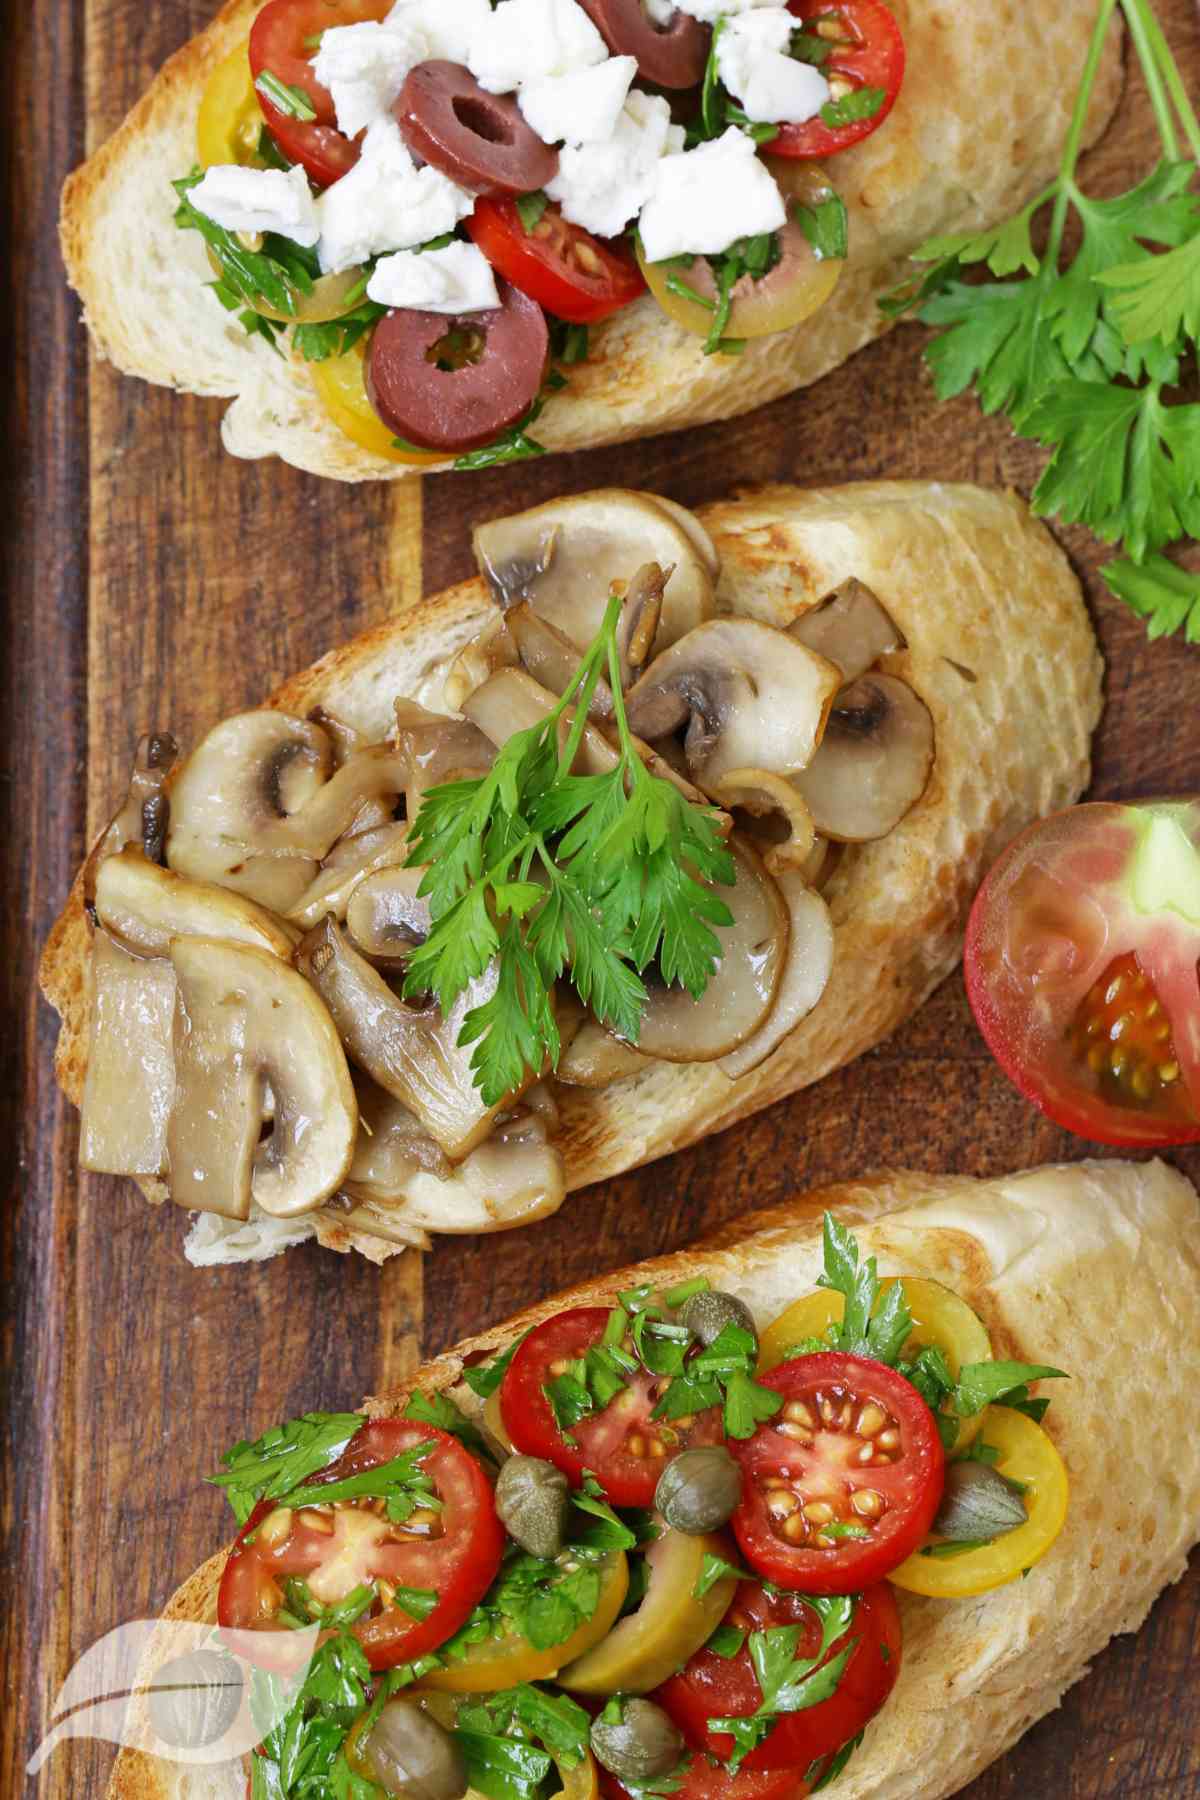 Bruschetta with mushrooms, tomatoes and olives